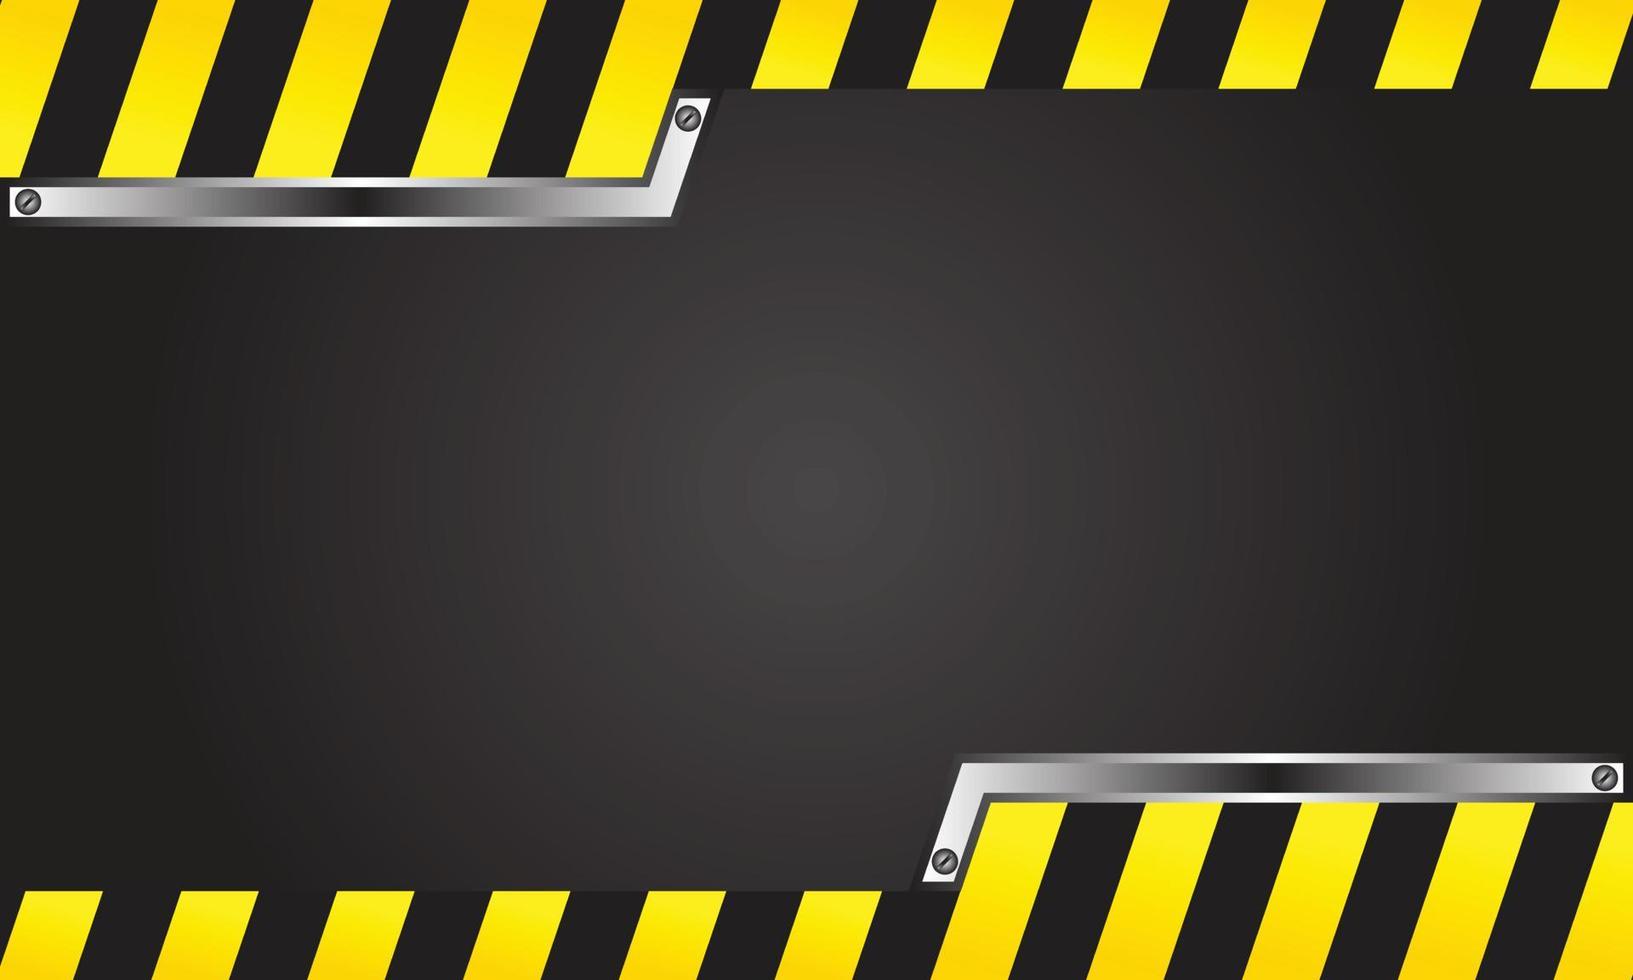 Construction Backround - Yellow Line Striped vector